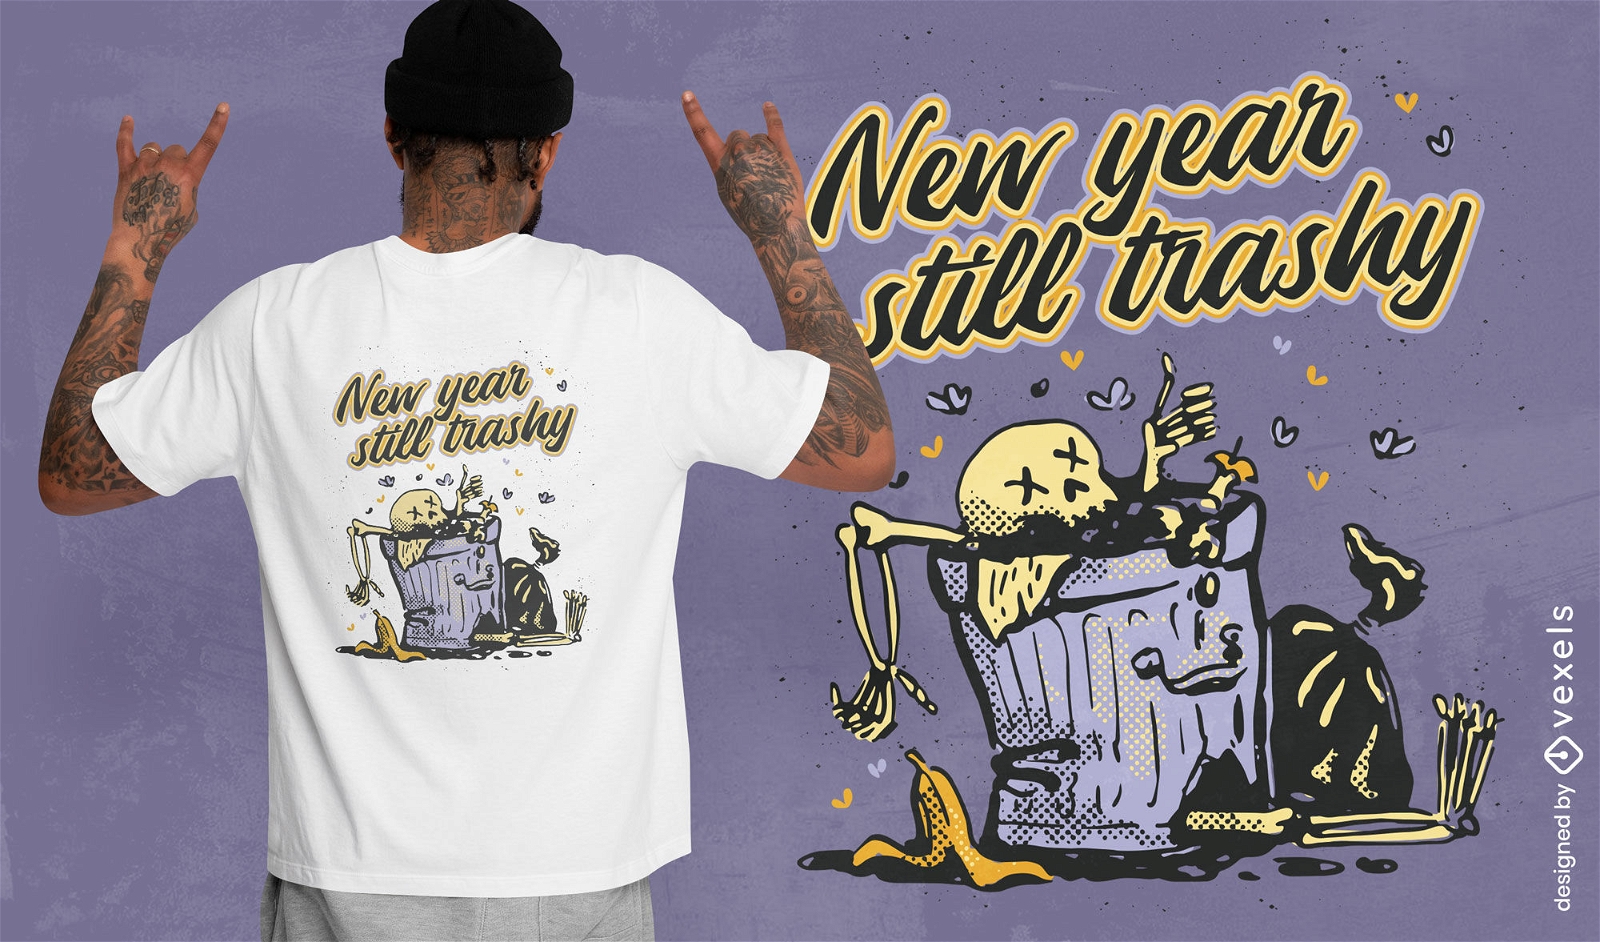 Skeleton in the trash new year t-shirt design